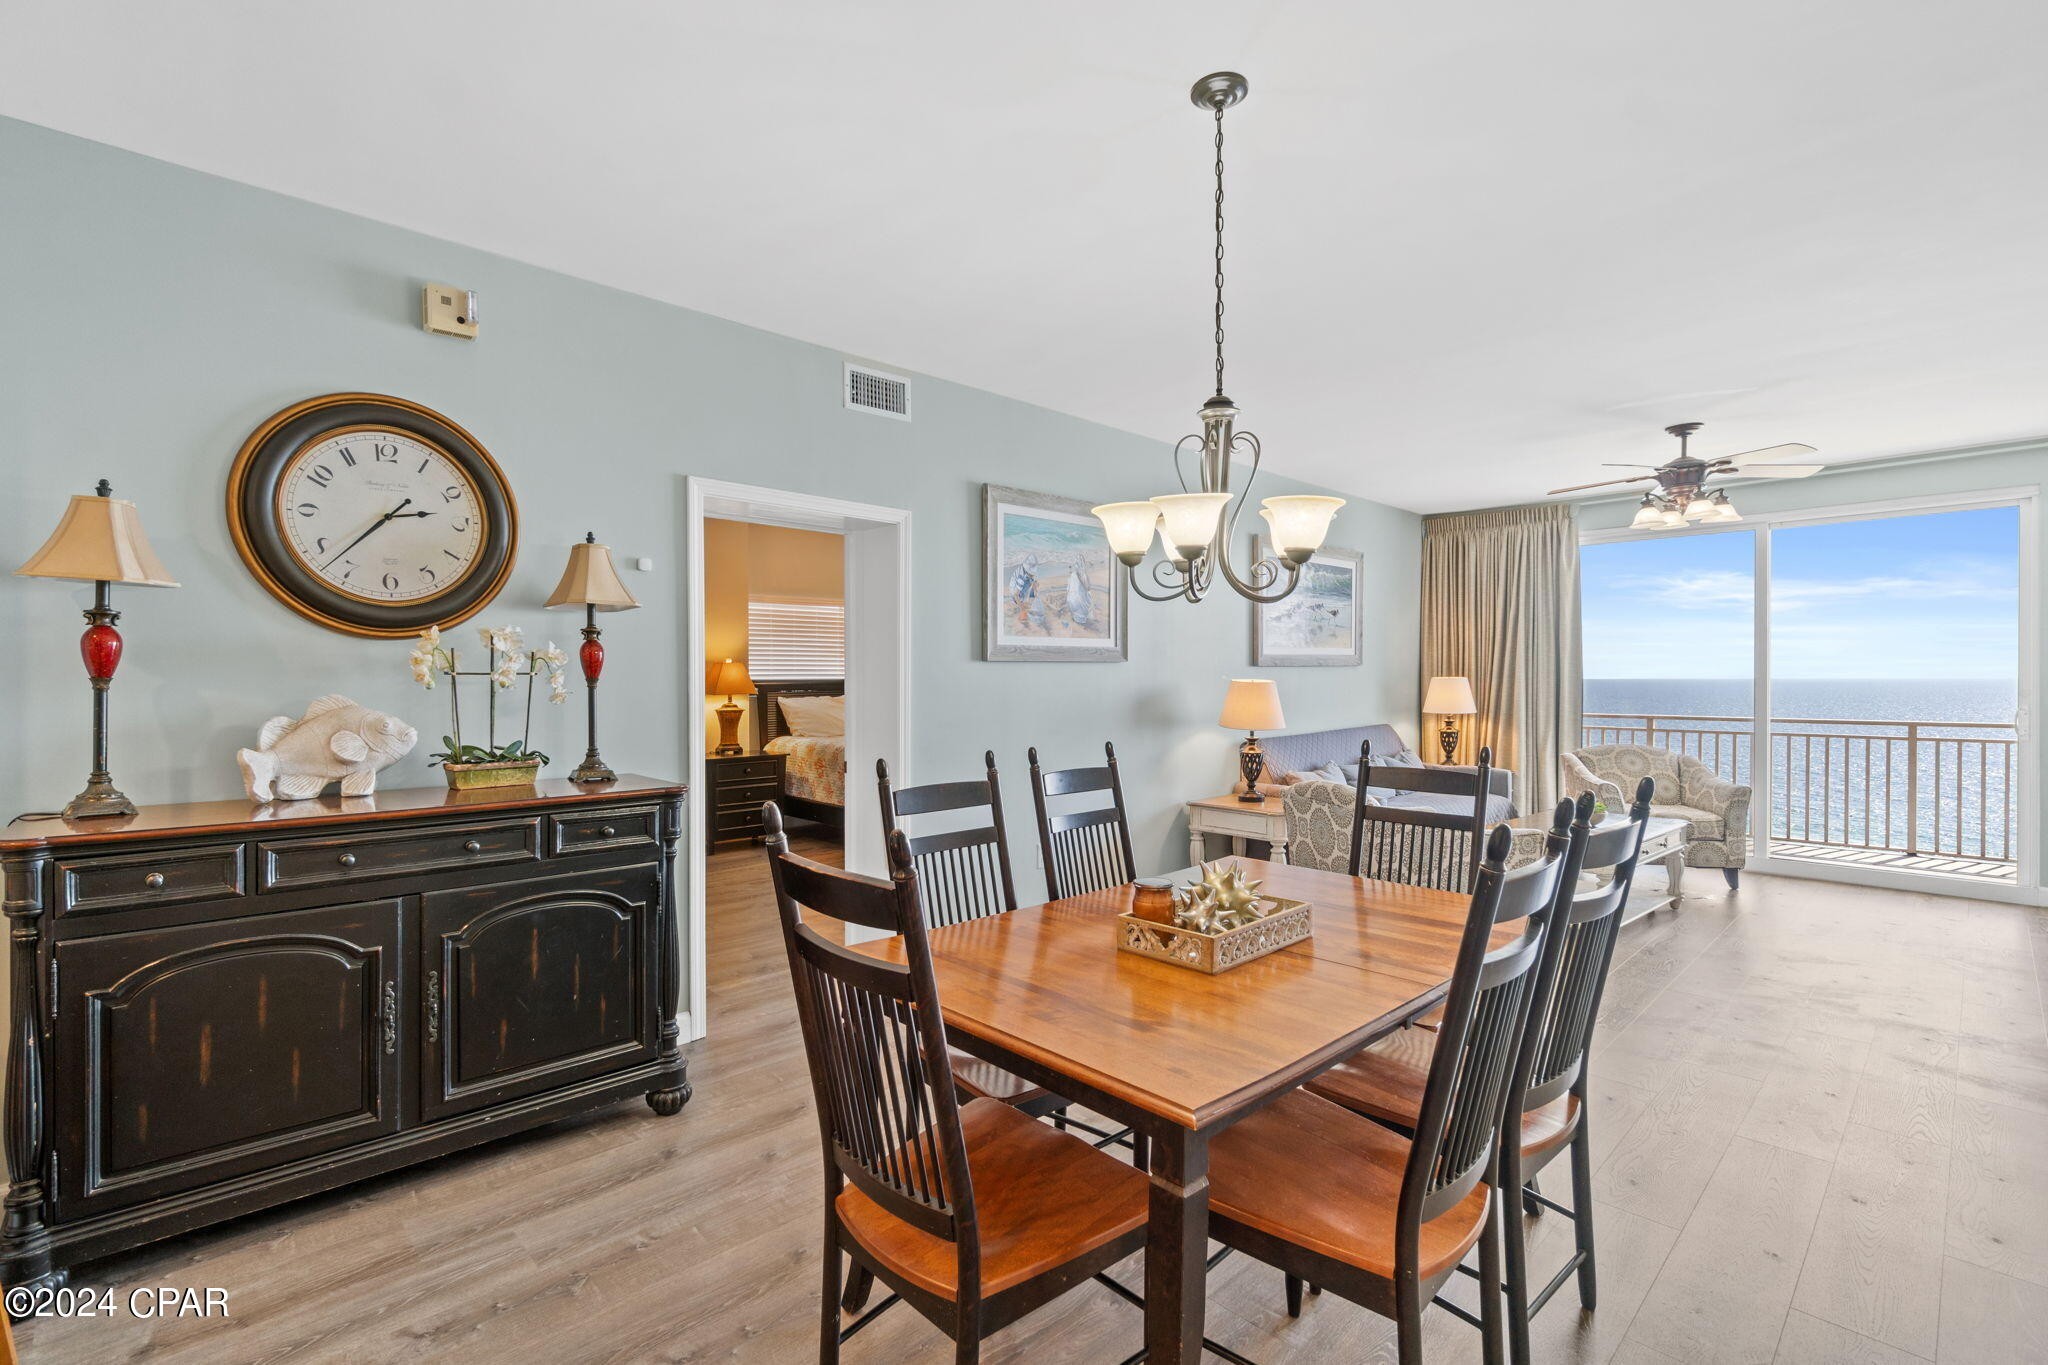 17739 Front Beach Road 1207W, Panama City Beach, Florida, 32413, United States, 2 Bedrooms Bedrooms, ,2 BathroomsBathrooms,Residential,For Sale,17739 Front Beach Road 1207W,1485794